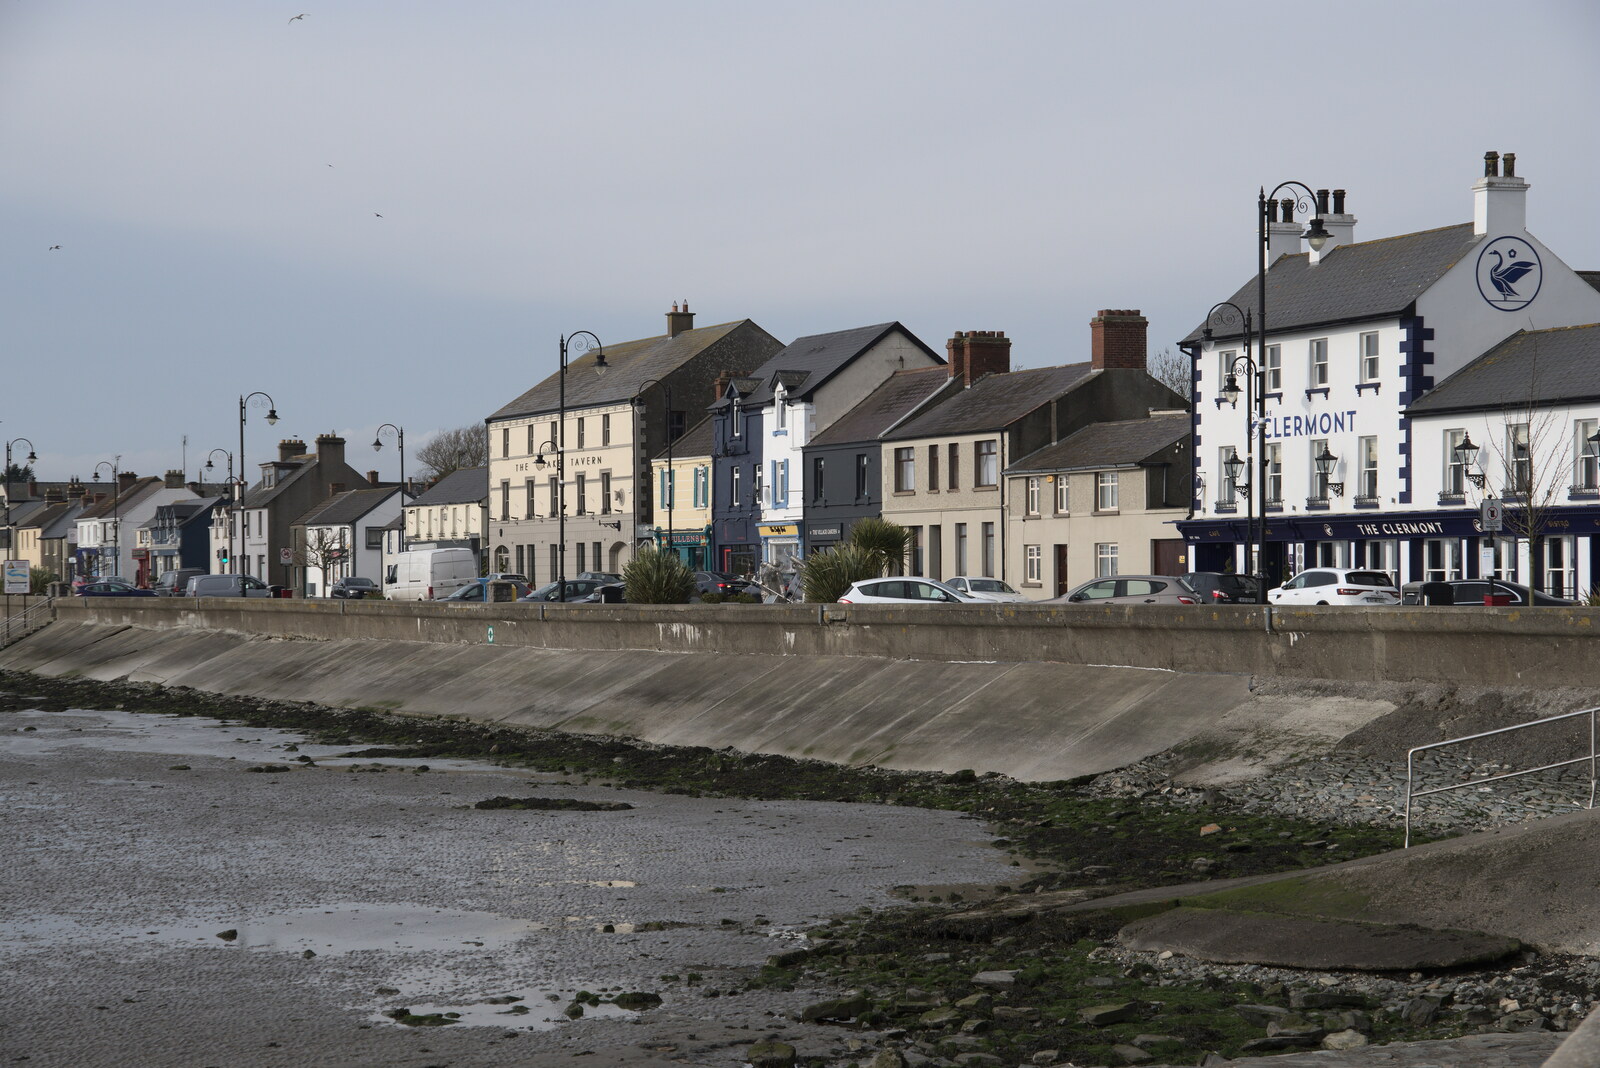 Blackrock North and South, Louth and County Dublin, Ireland - 23rd April 2022: The seafront at Blackrock, Louth